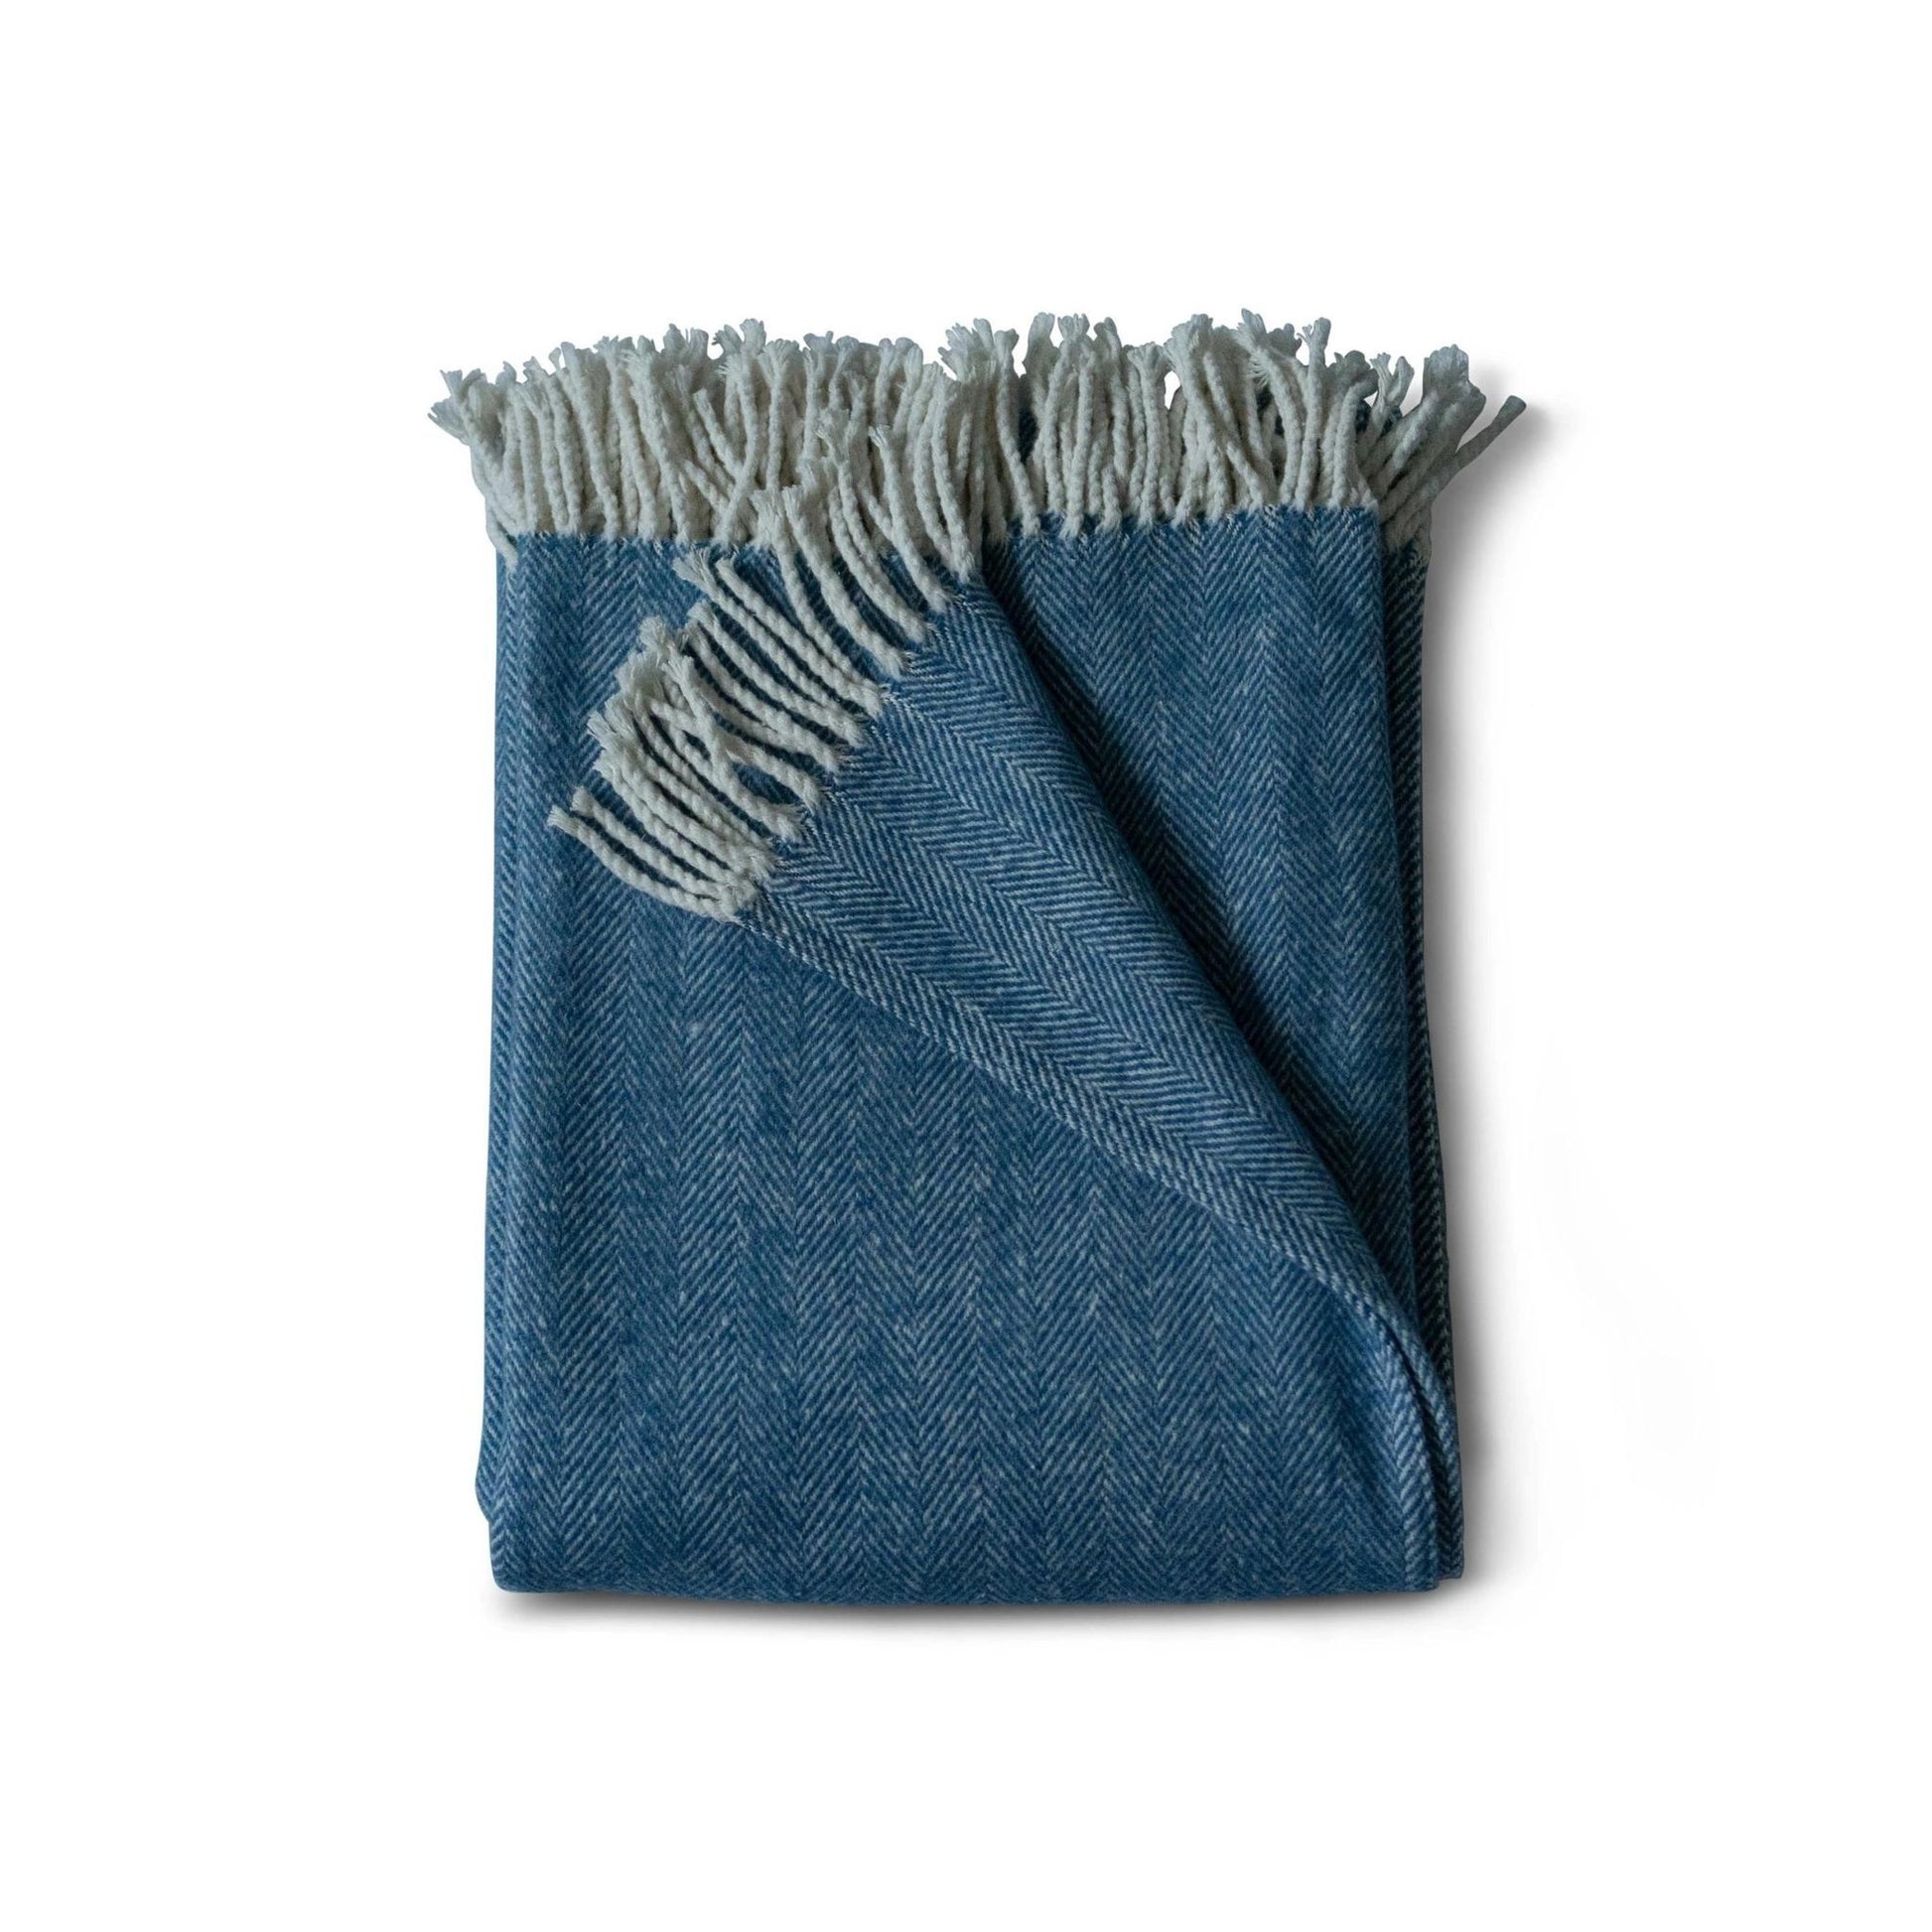 Brushed cotton throw blanket in steel blue herringbone pattern with cotton fringe  